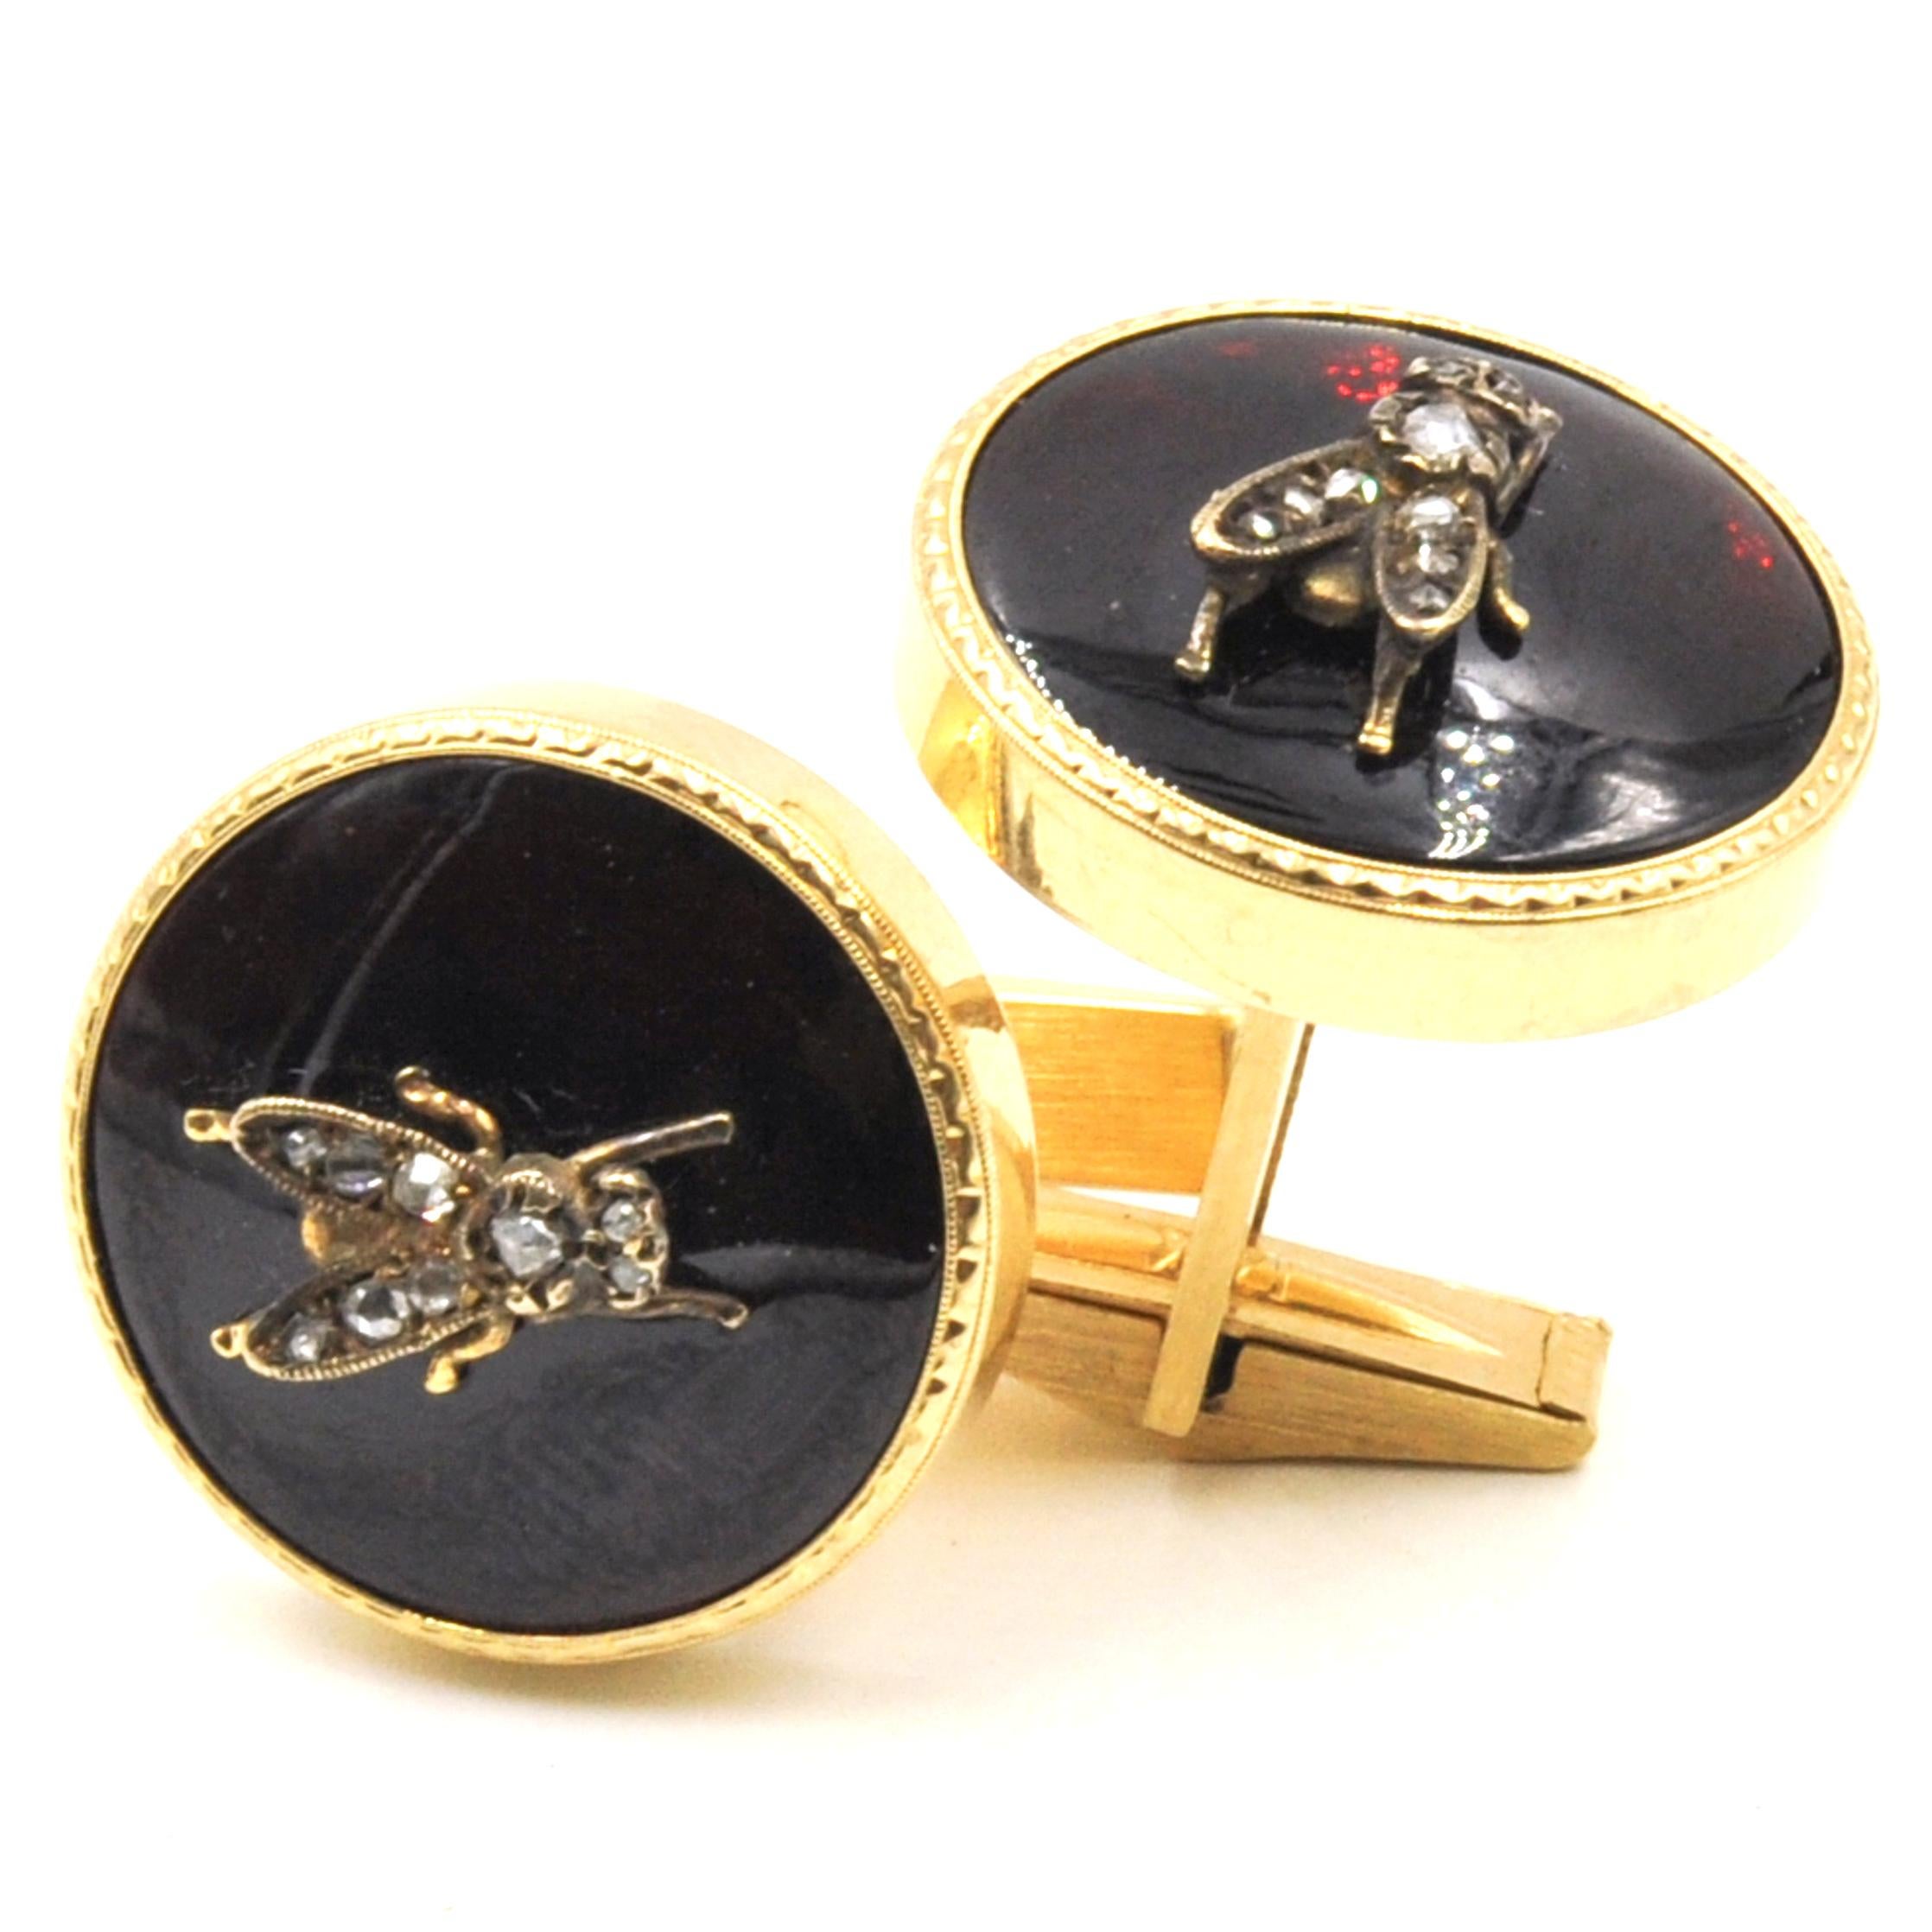 Beautiful pair of cuff links crafted in 14k Yellow Gold. The pair is is highlighted with Flies that are set with Rose Cut Diamonds along the center. Nine Diamonds set in each fly approximately .20 tcw in the pair. The flies are step atop a resin